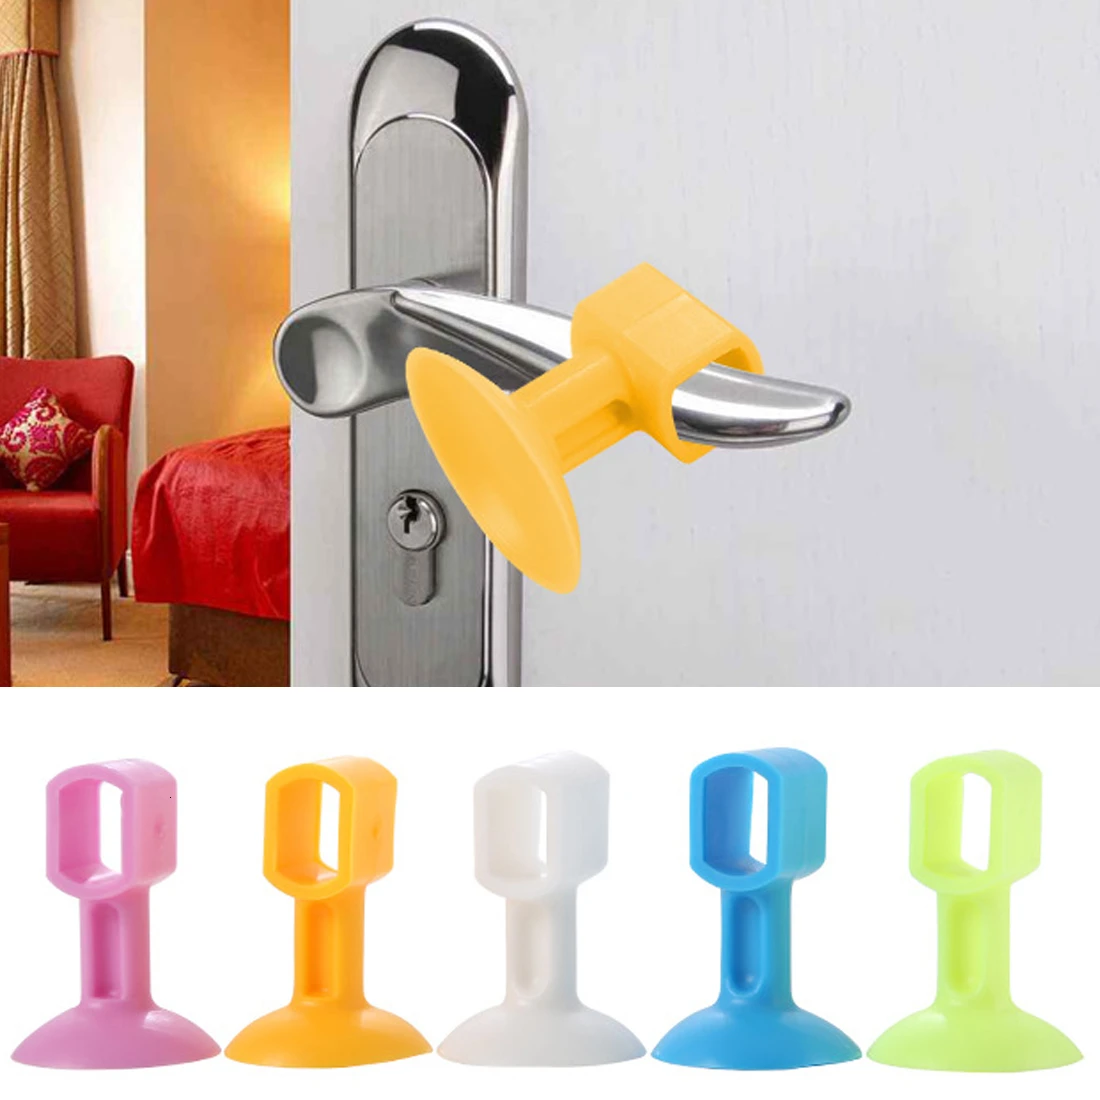 

5Pcs Doorknob Wall Mute Crash Pad Cushion Cabinet Door Handle Lock Silencer Attached Silicone Anti-collision House Door Stopper